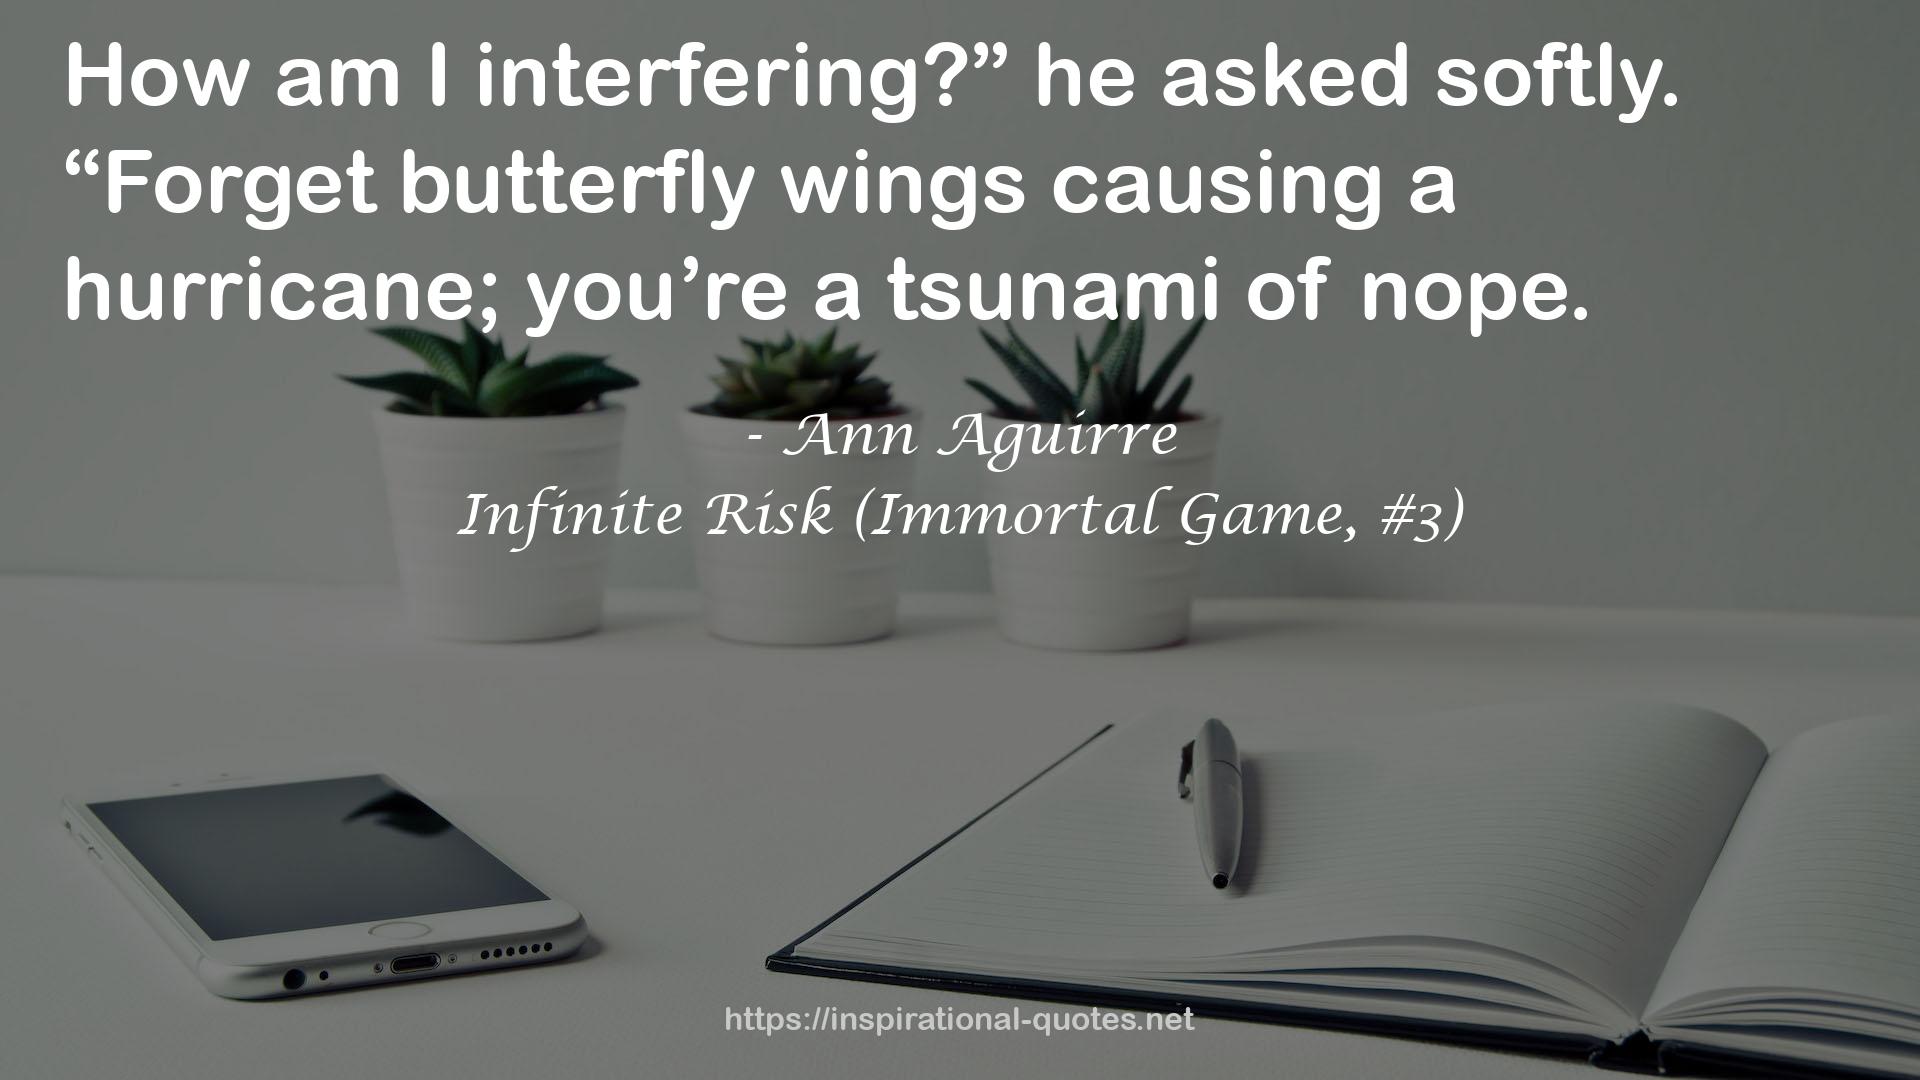 Infinite Risk (Immortal Game, #3) QUOTES